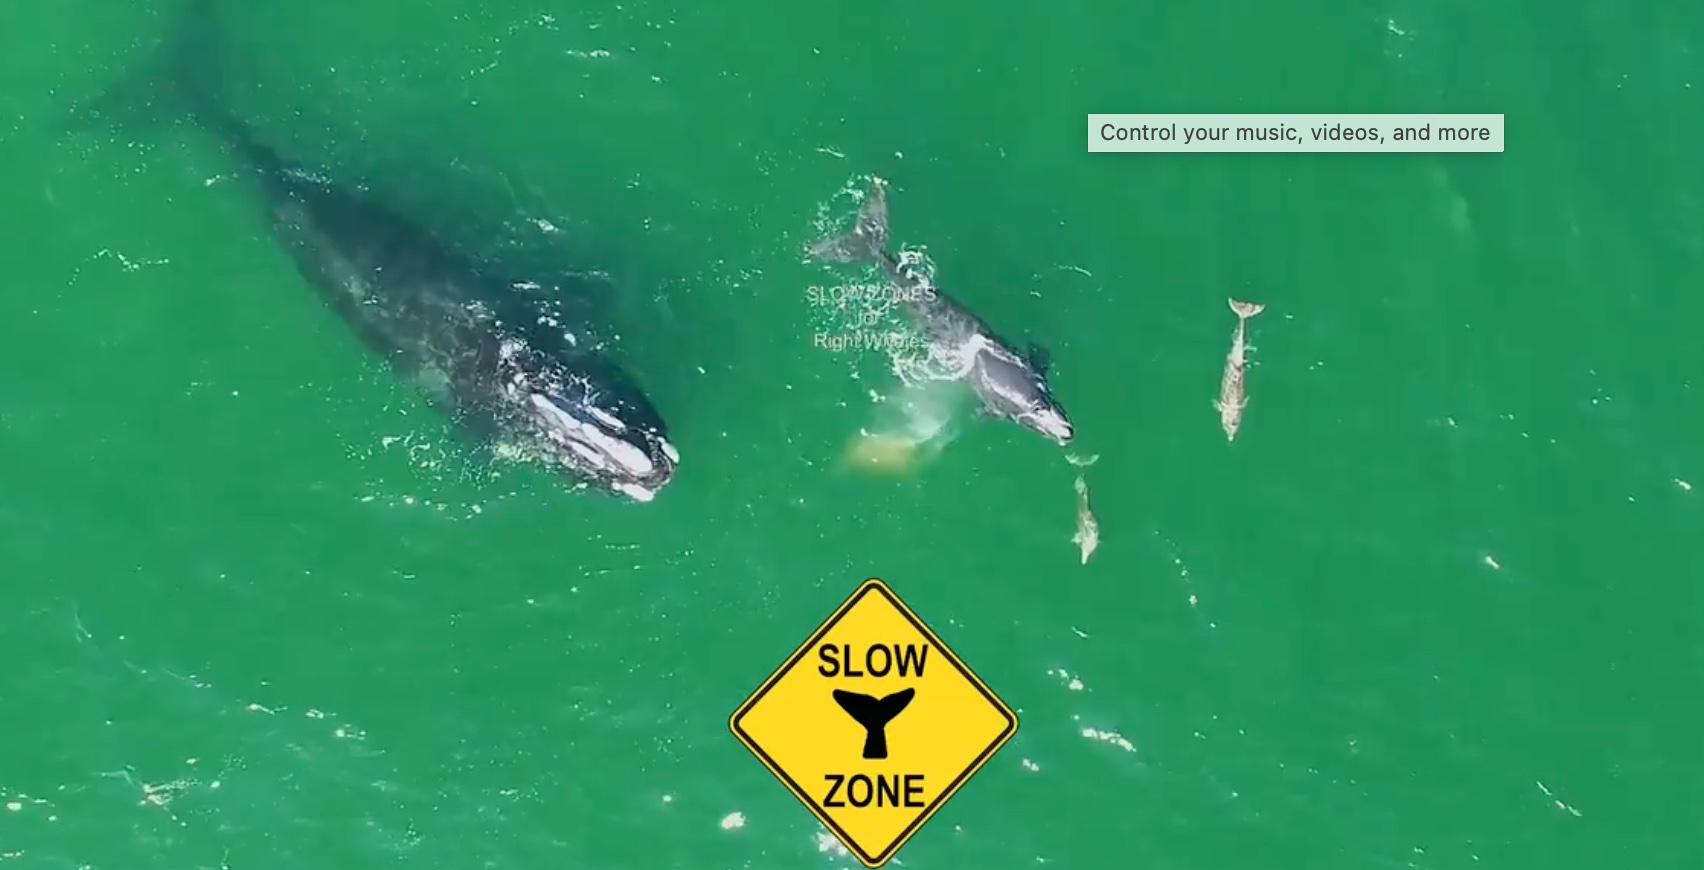 Weekly Economic News Roundup and Right Whale Slow Zones